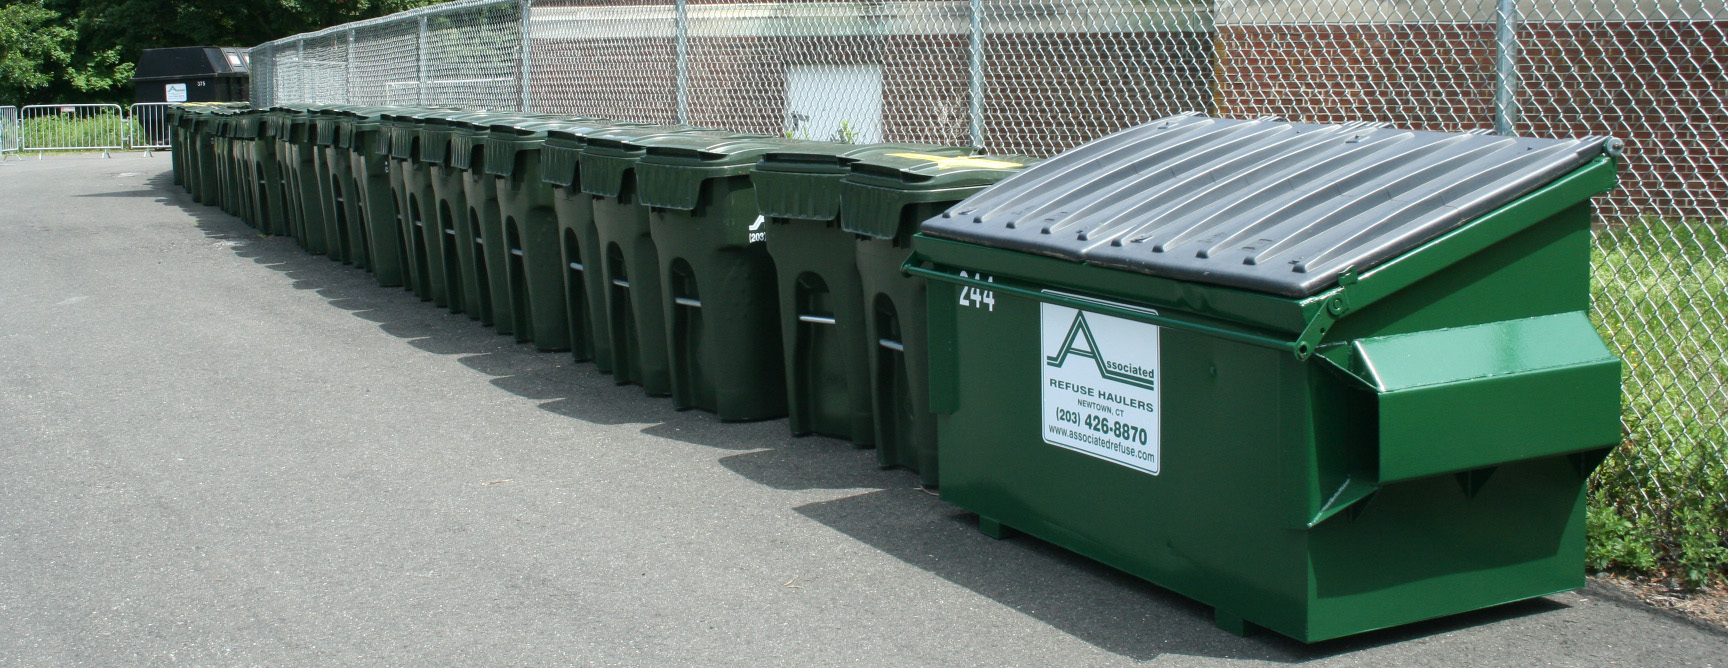 Associated Refuse | Trash Removal, Containers, Recycle, Manure Removal